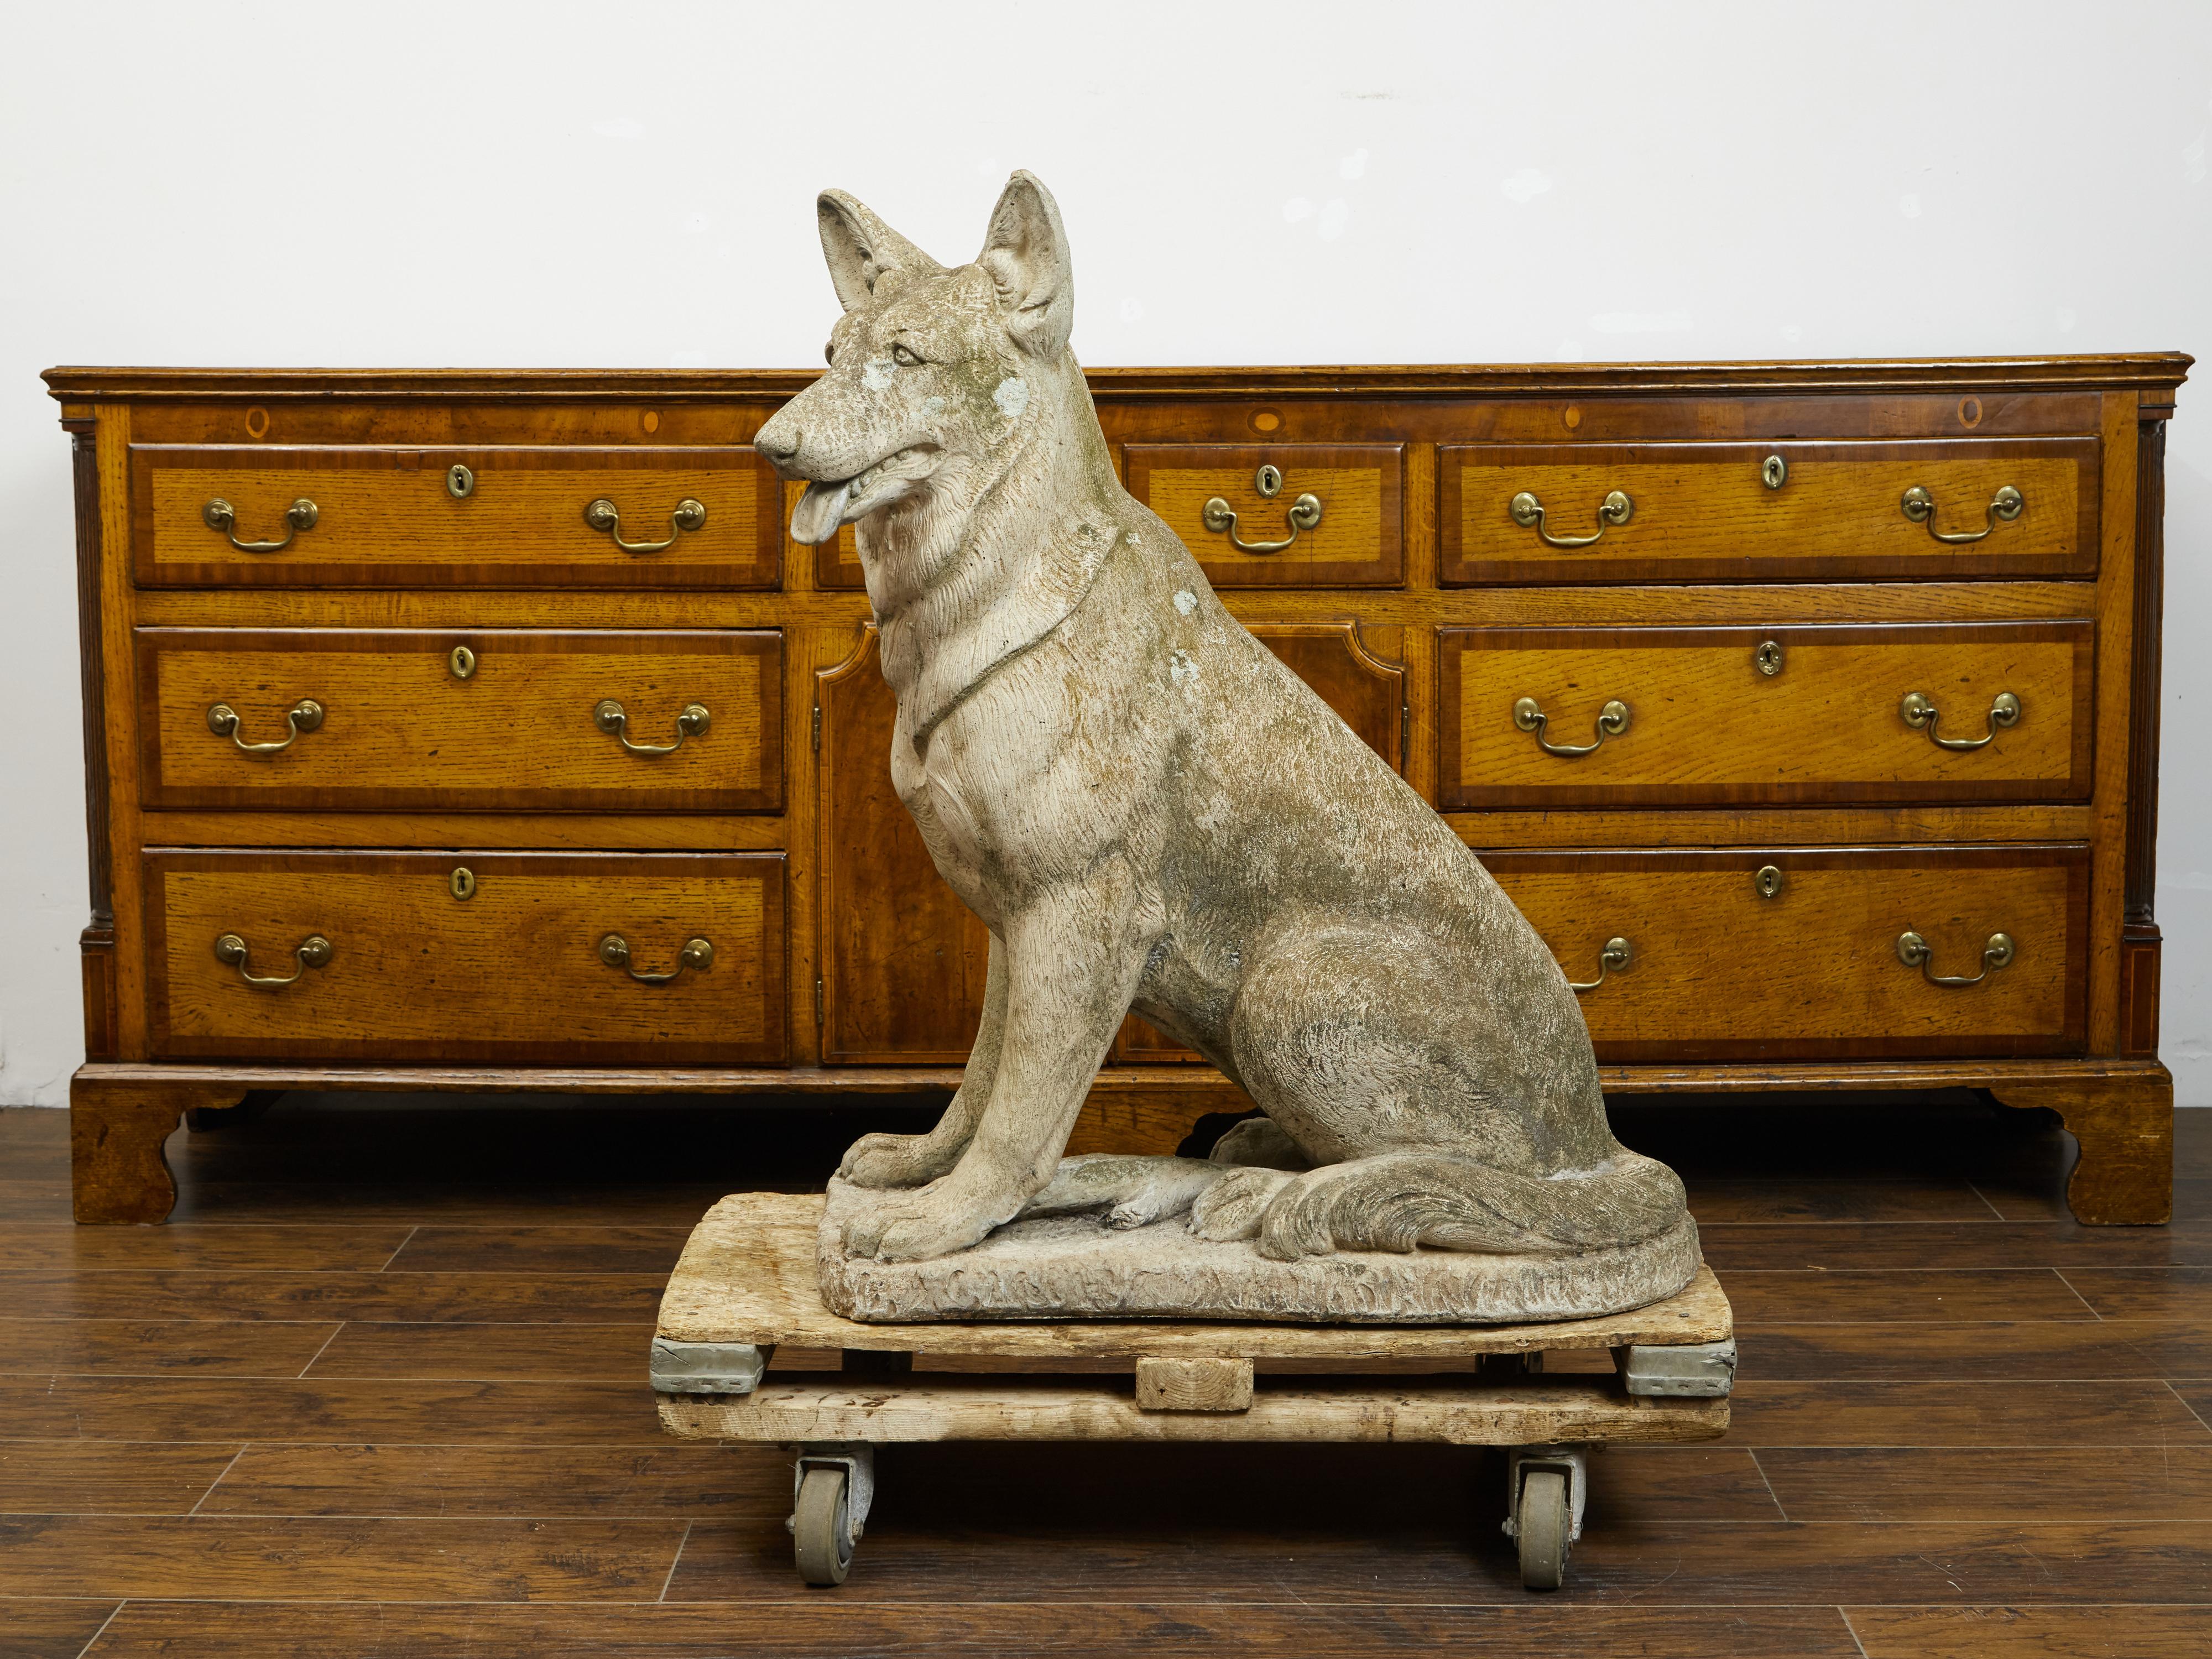 An English carved stone German Shepherd dog sculpture from the mid 20th century, on oval base. Created in England during the second quarter of the 20th century, this stone German Shepherd sculpture charms us with its skillful depiction and nicely